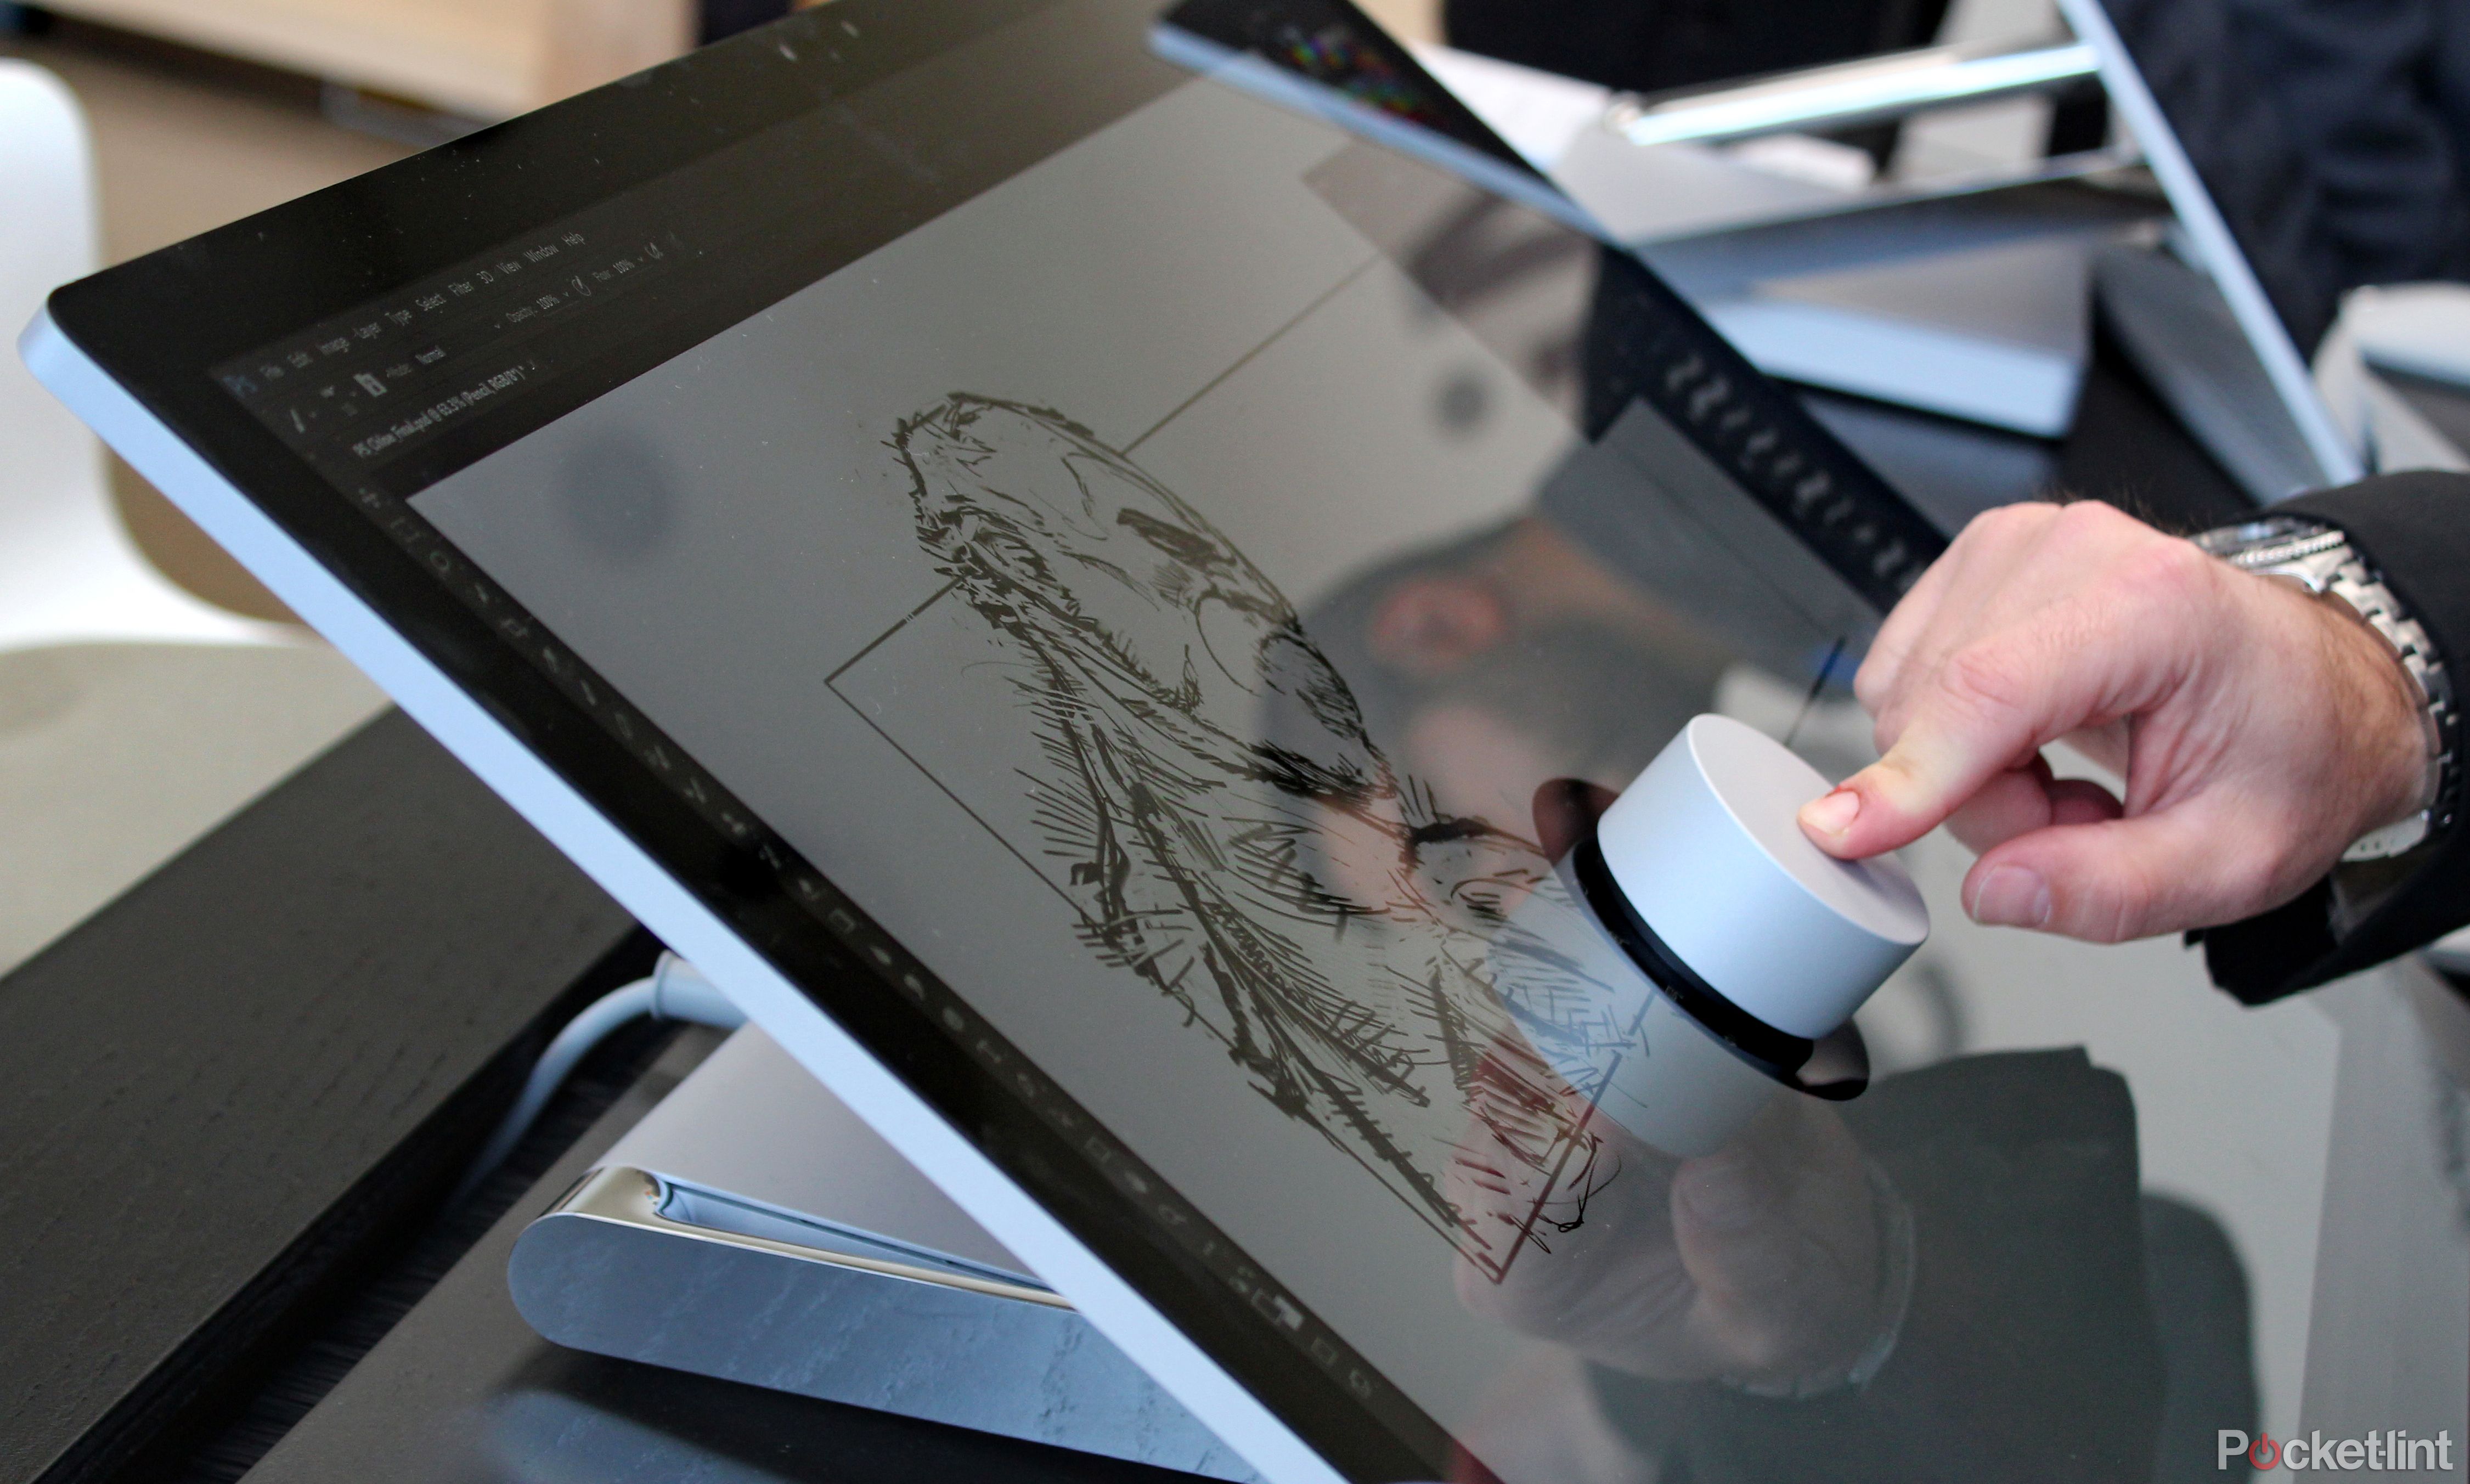 Microsoft Surface Studio: A stunning all-in-one PC that doubles as a  drafting table